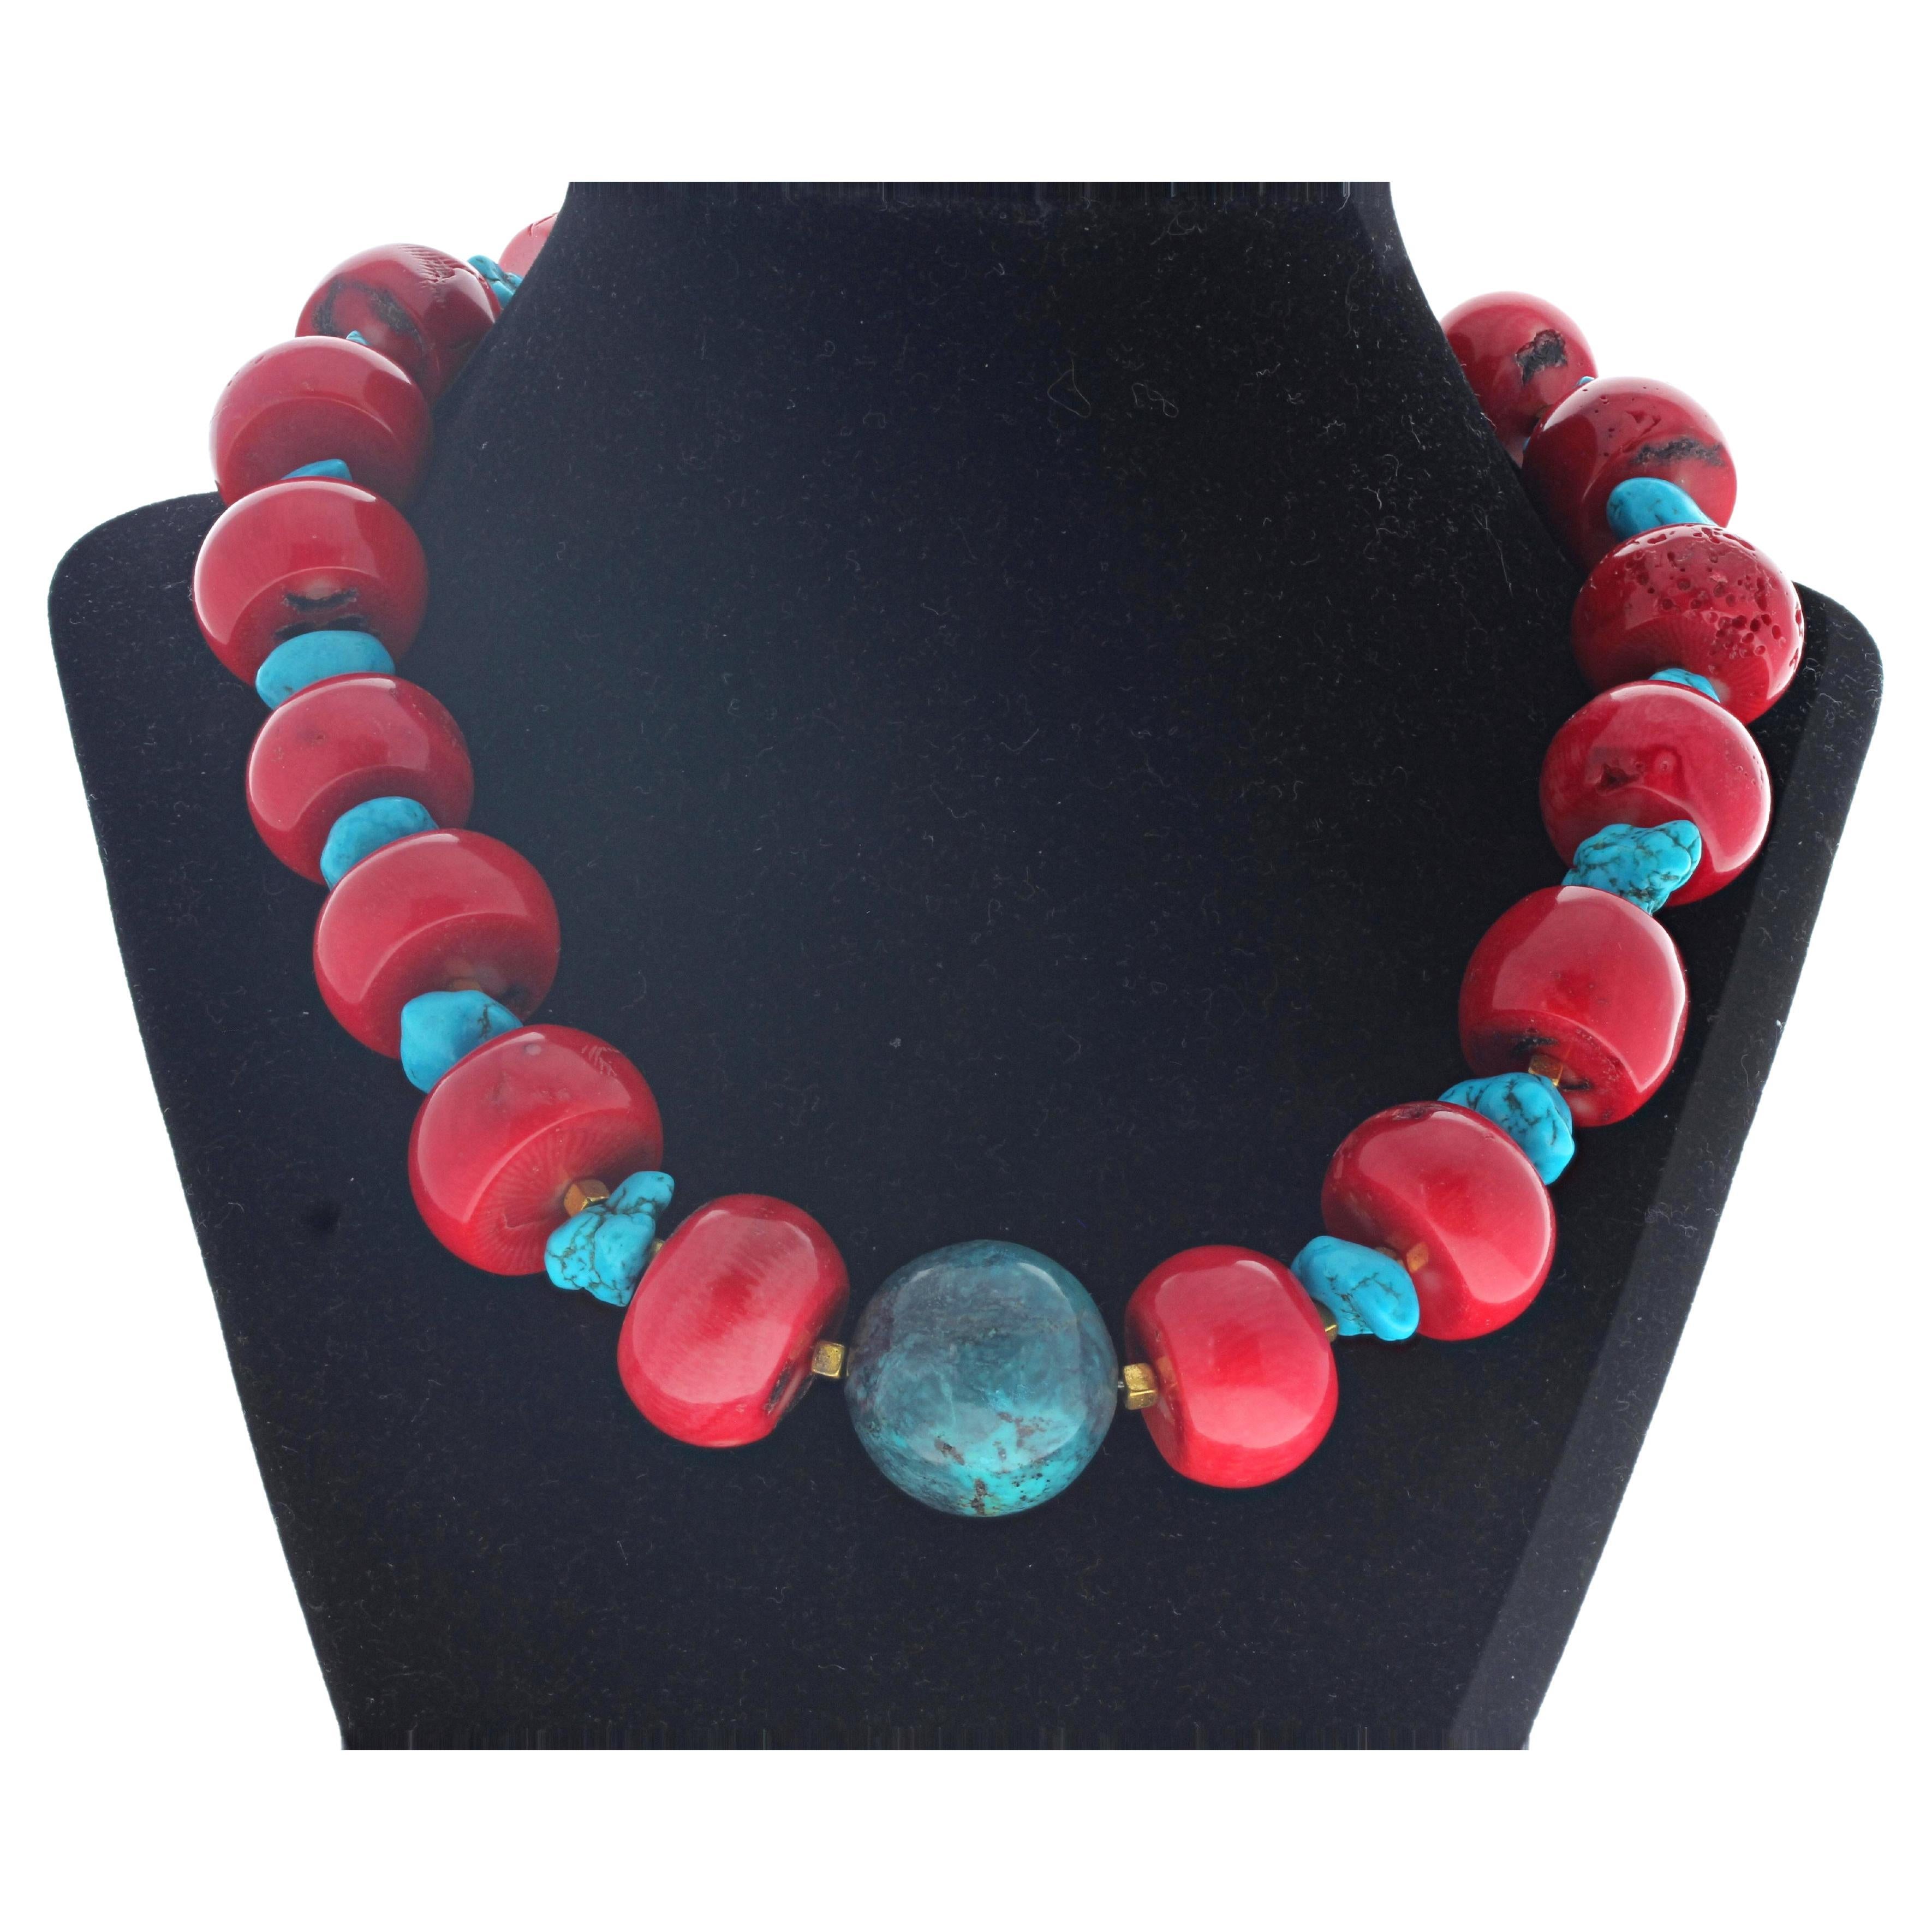 This dramatic necklace is 18 1/2 inches long.  The center Azurite is 24mm round.  The natural red corals are different sizes with the largest being approximately 23mm x 15mm thick.  The clasp is an easy to use gold plated hook clasp.  